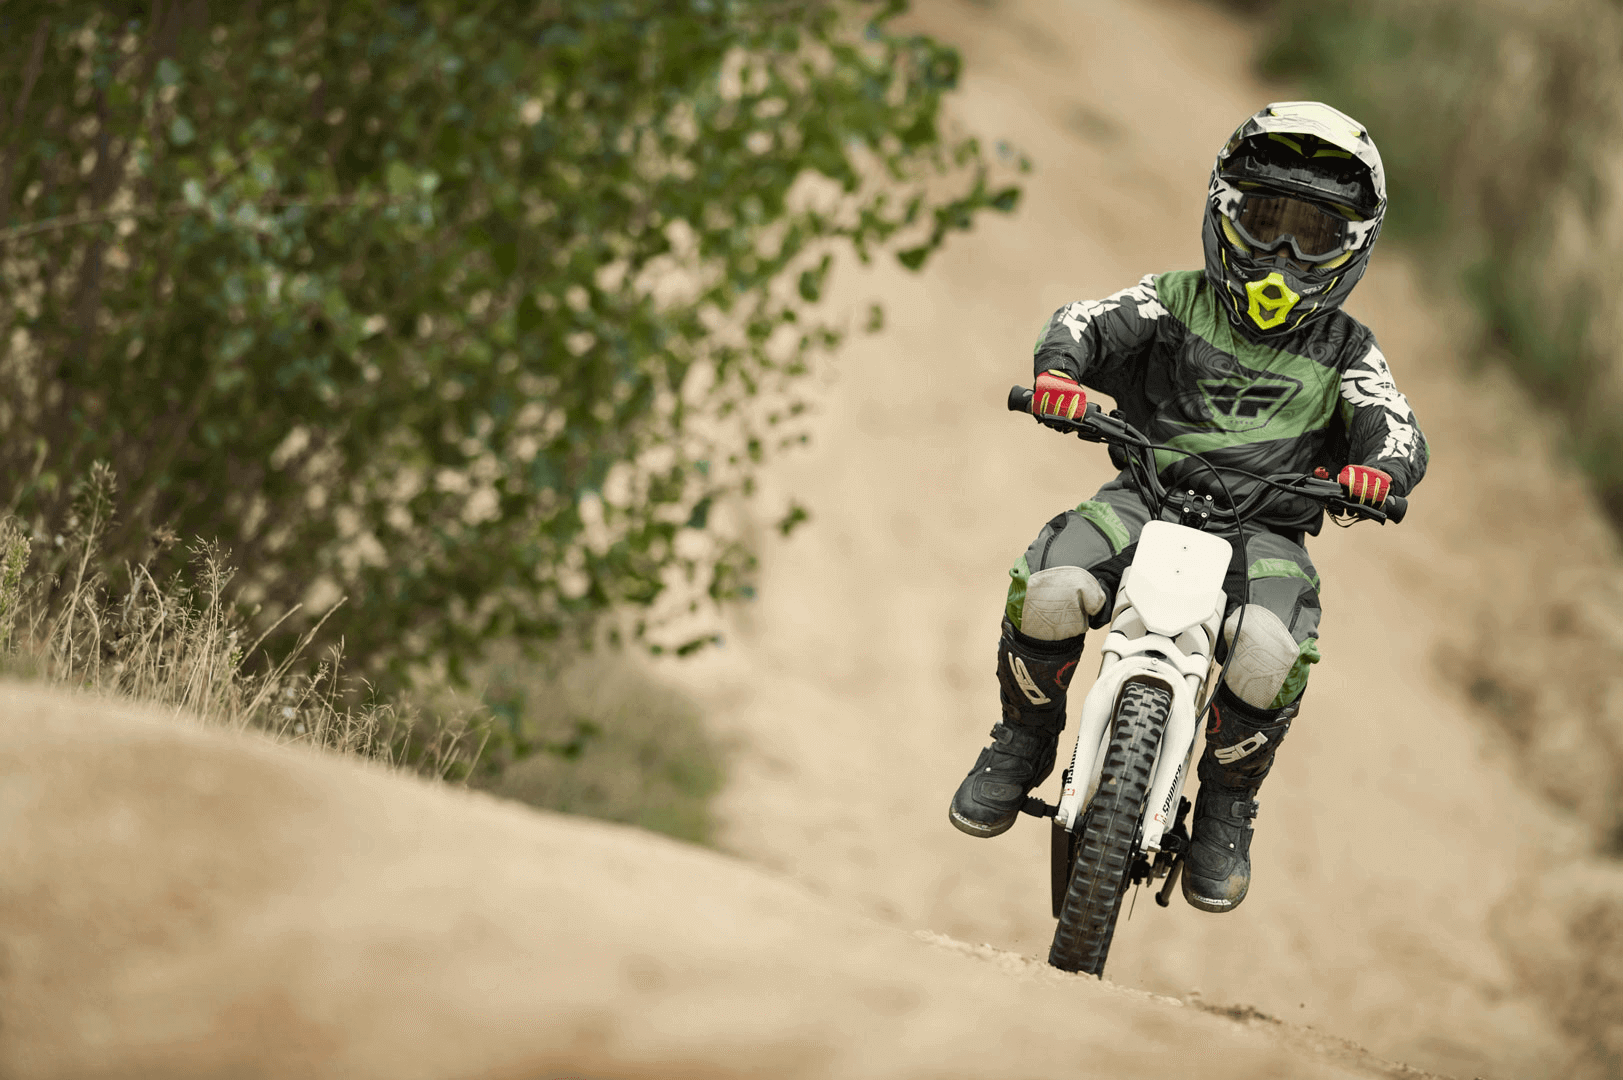 15 Best Electric Dirt Bikes for Kids to Buy in 2019 - Mini Bikes Guide